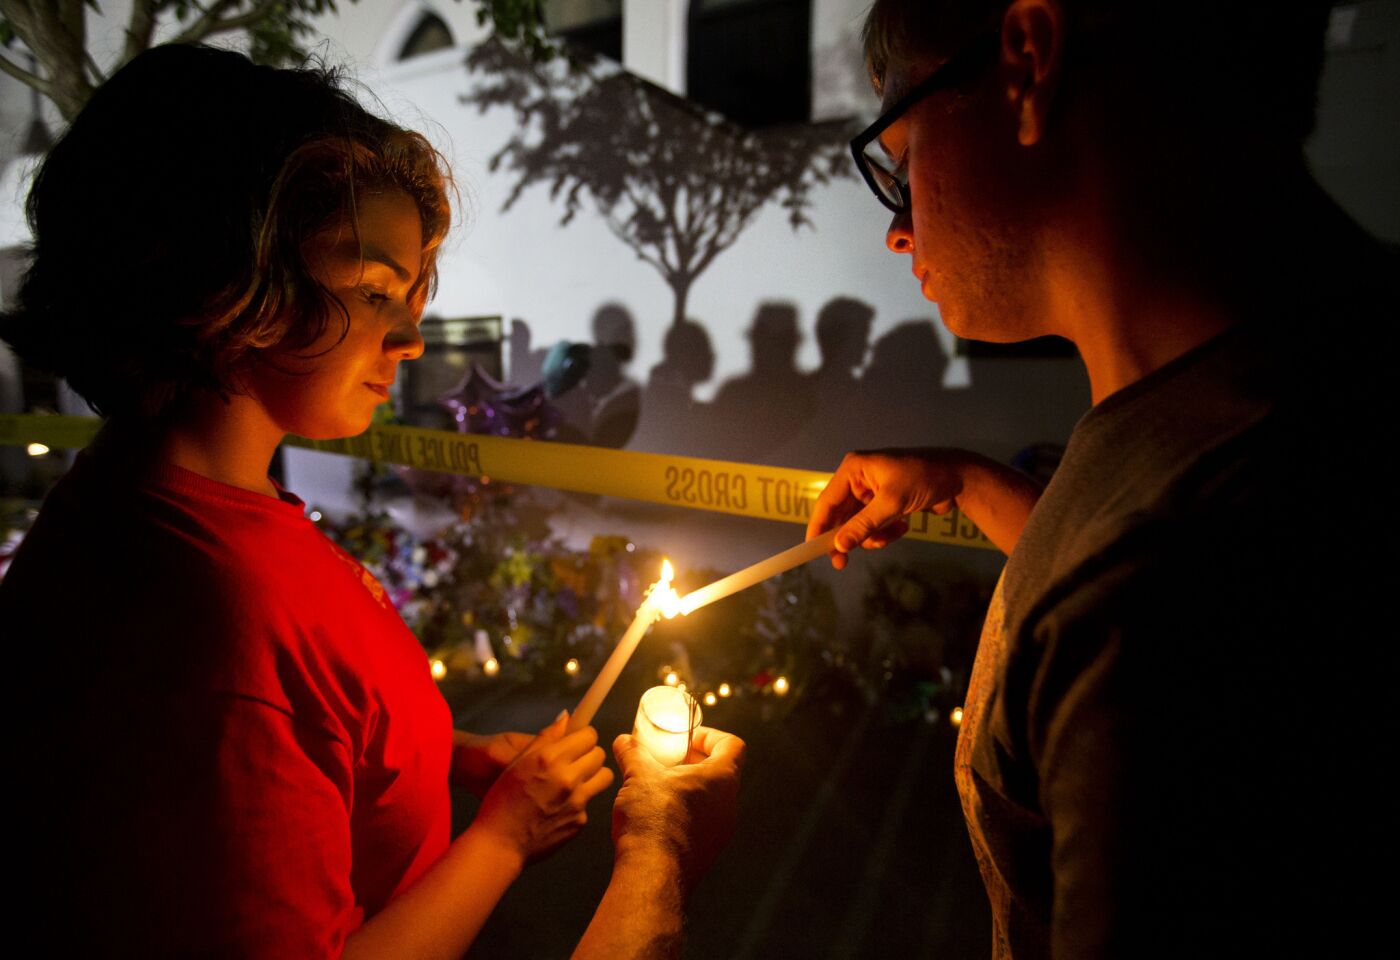 Olina Ortega, left, and Austin Gibbs light candles at a sidewalk memorial in front of Emanuel AME Church in Charleston.